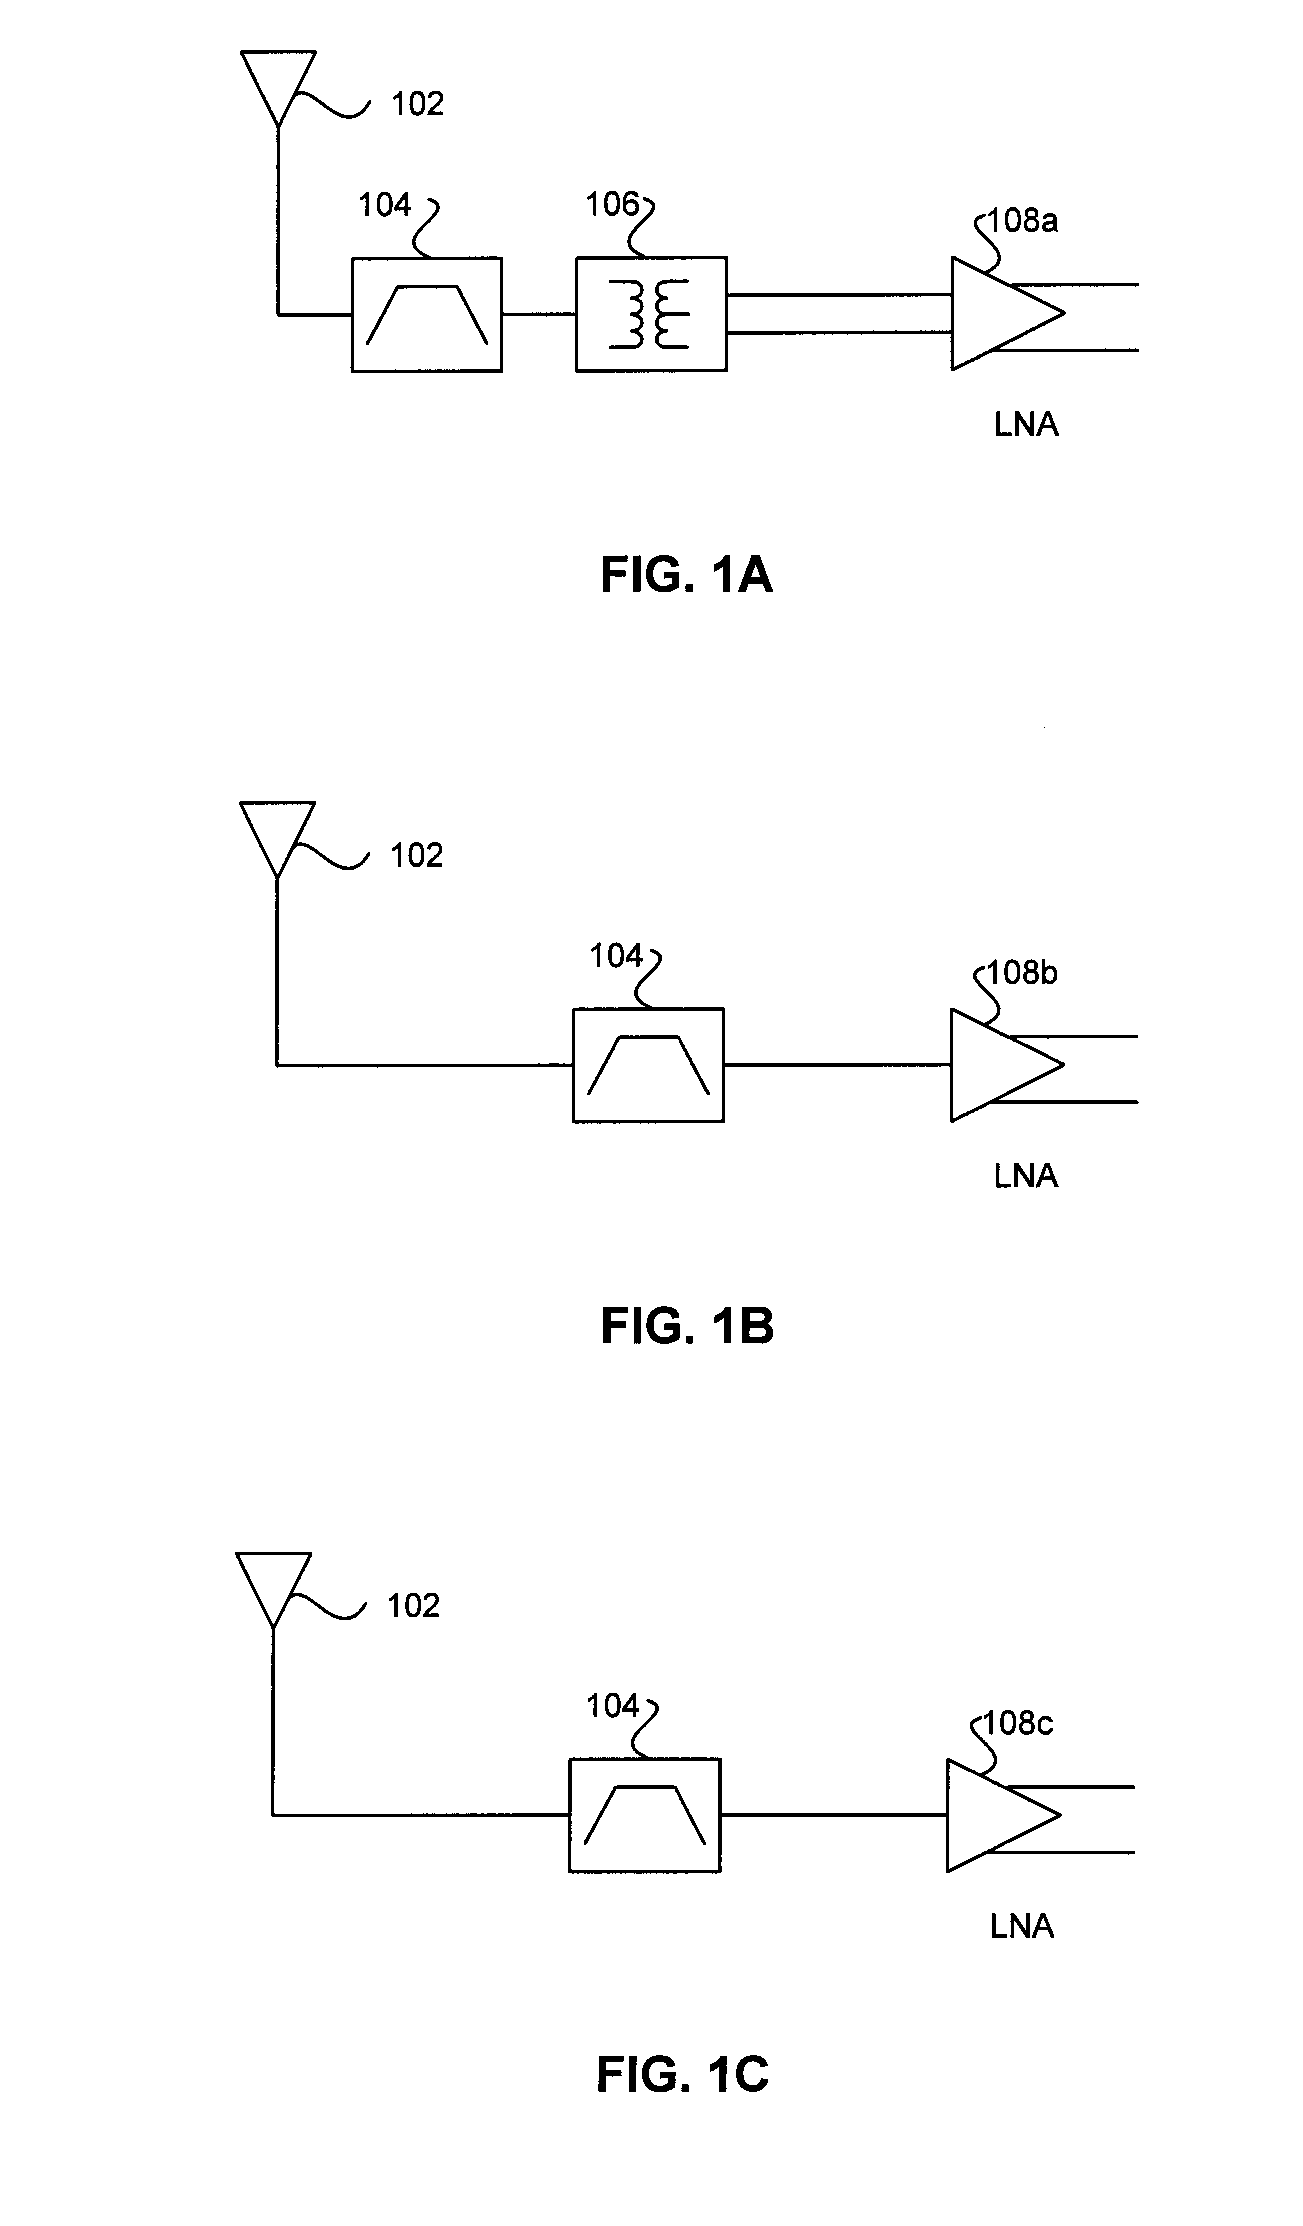 Method and system for a low power fully differential noise cancelling low noise amplifier